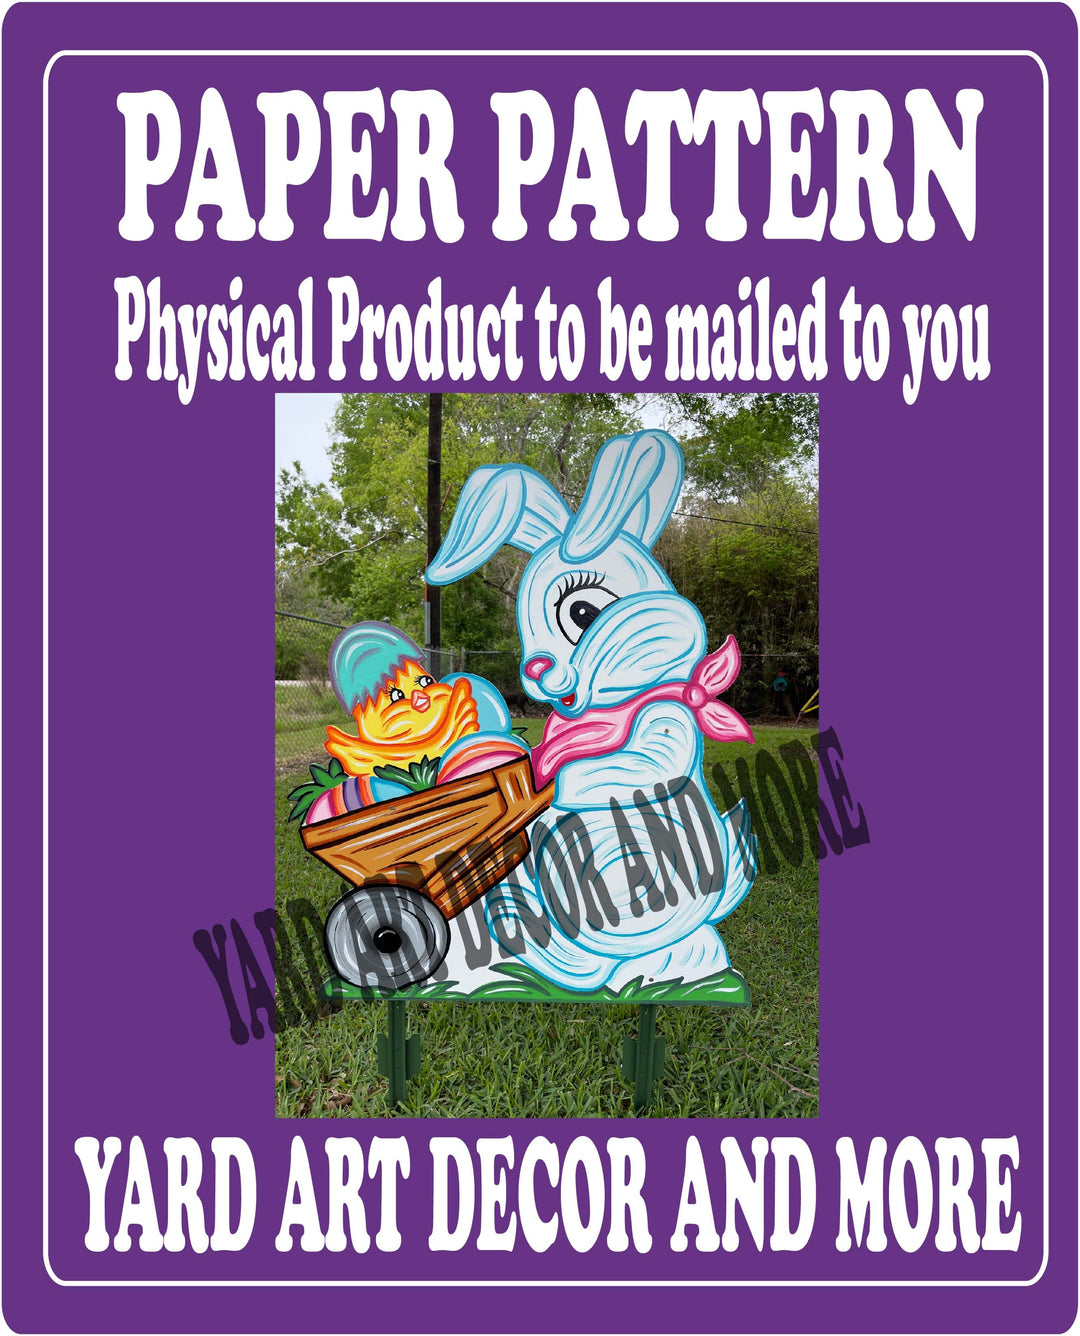 Easter Bunny Pushes Cart Yard Art Paper Pattern